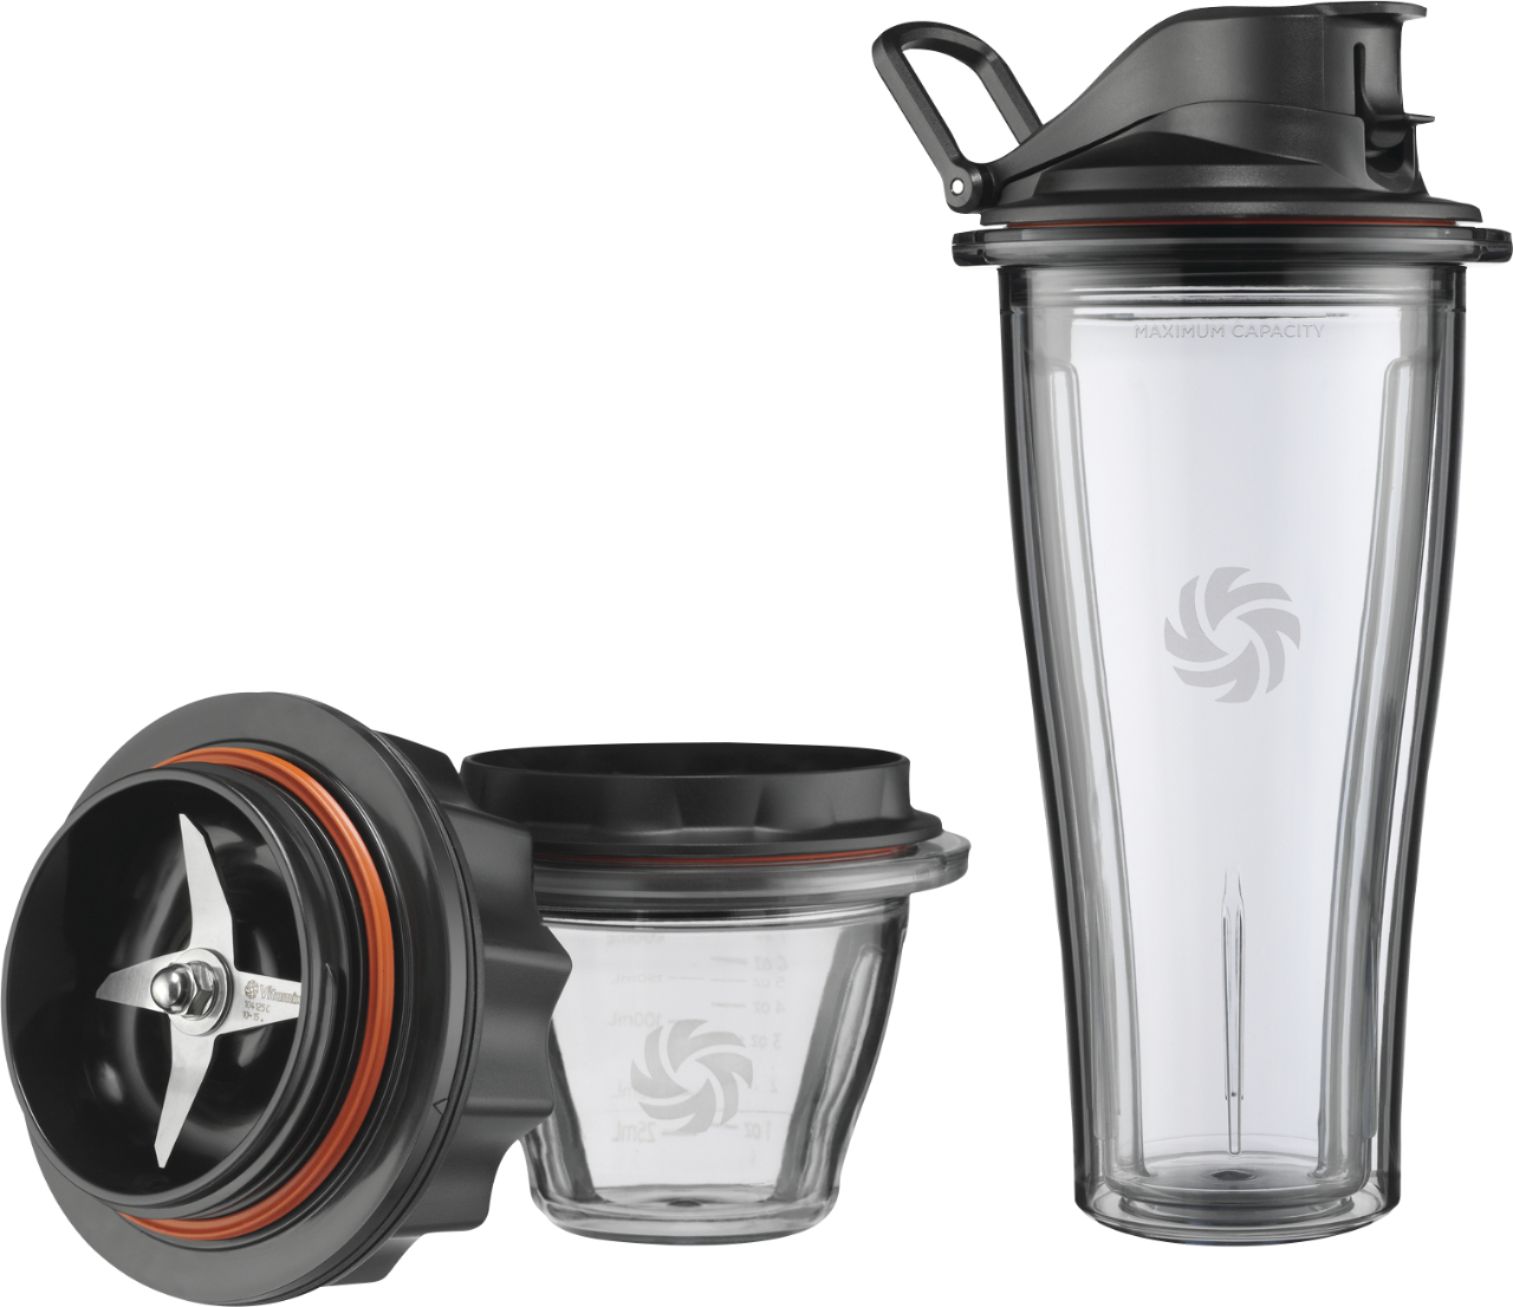 Angle View: Breville - 5-Speed Blender - Silver